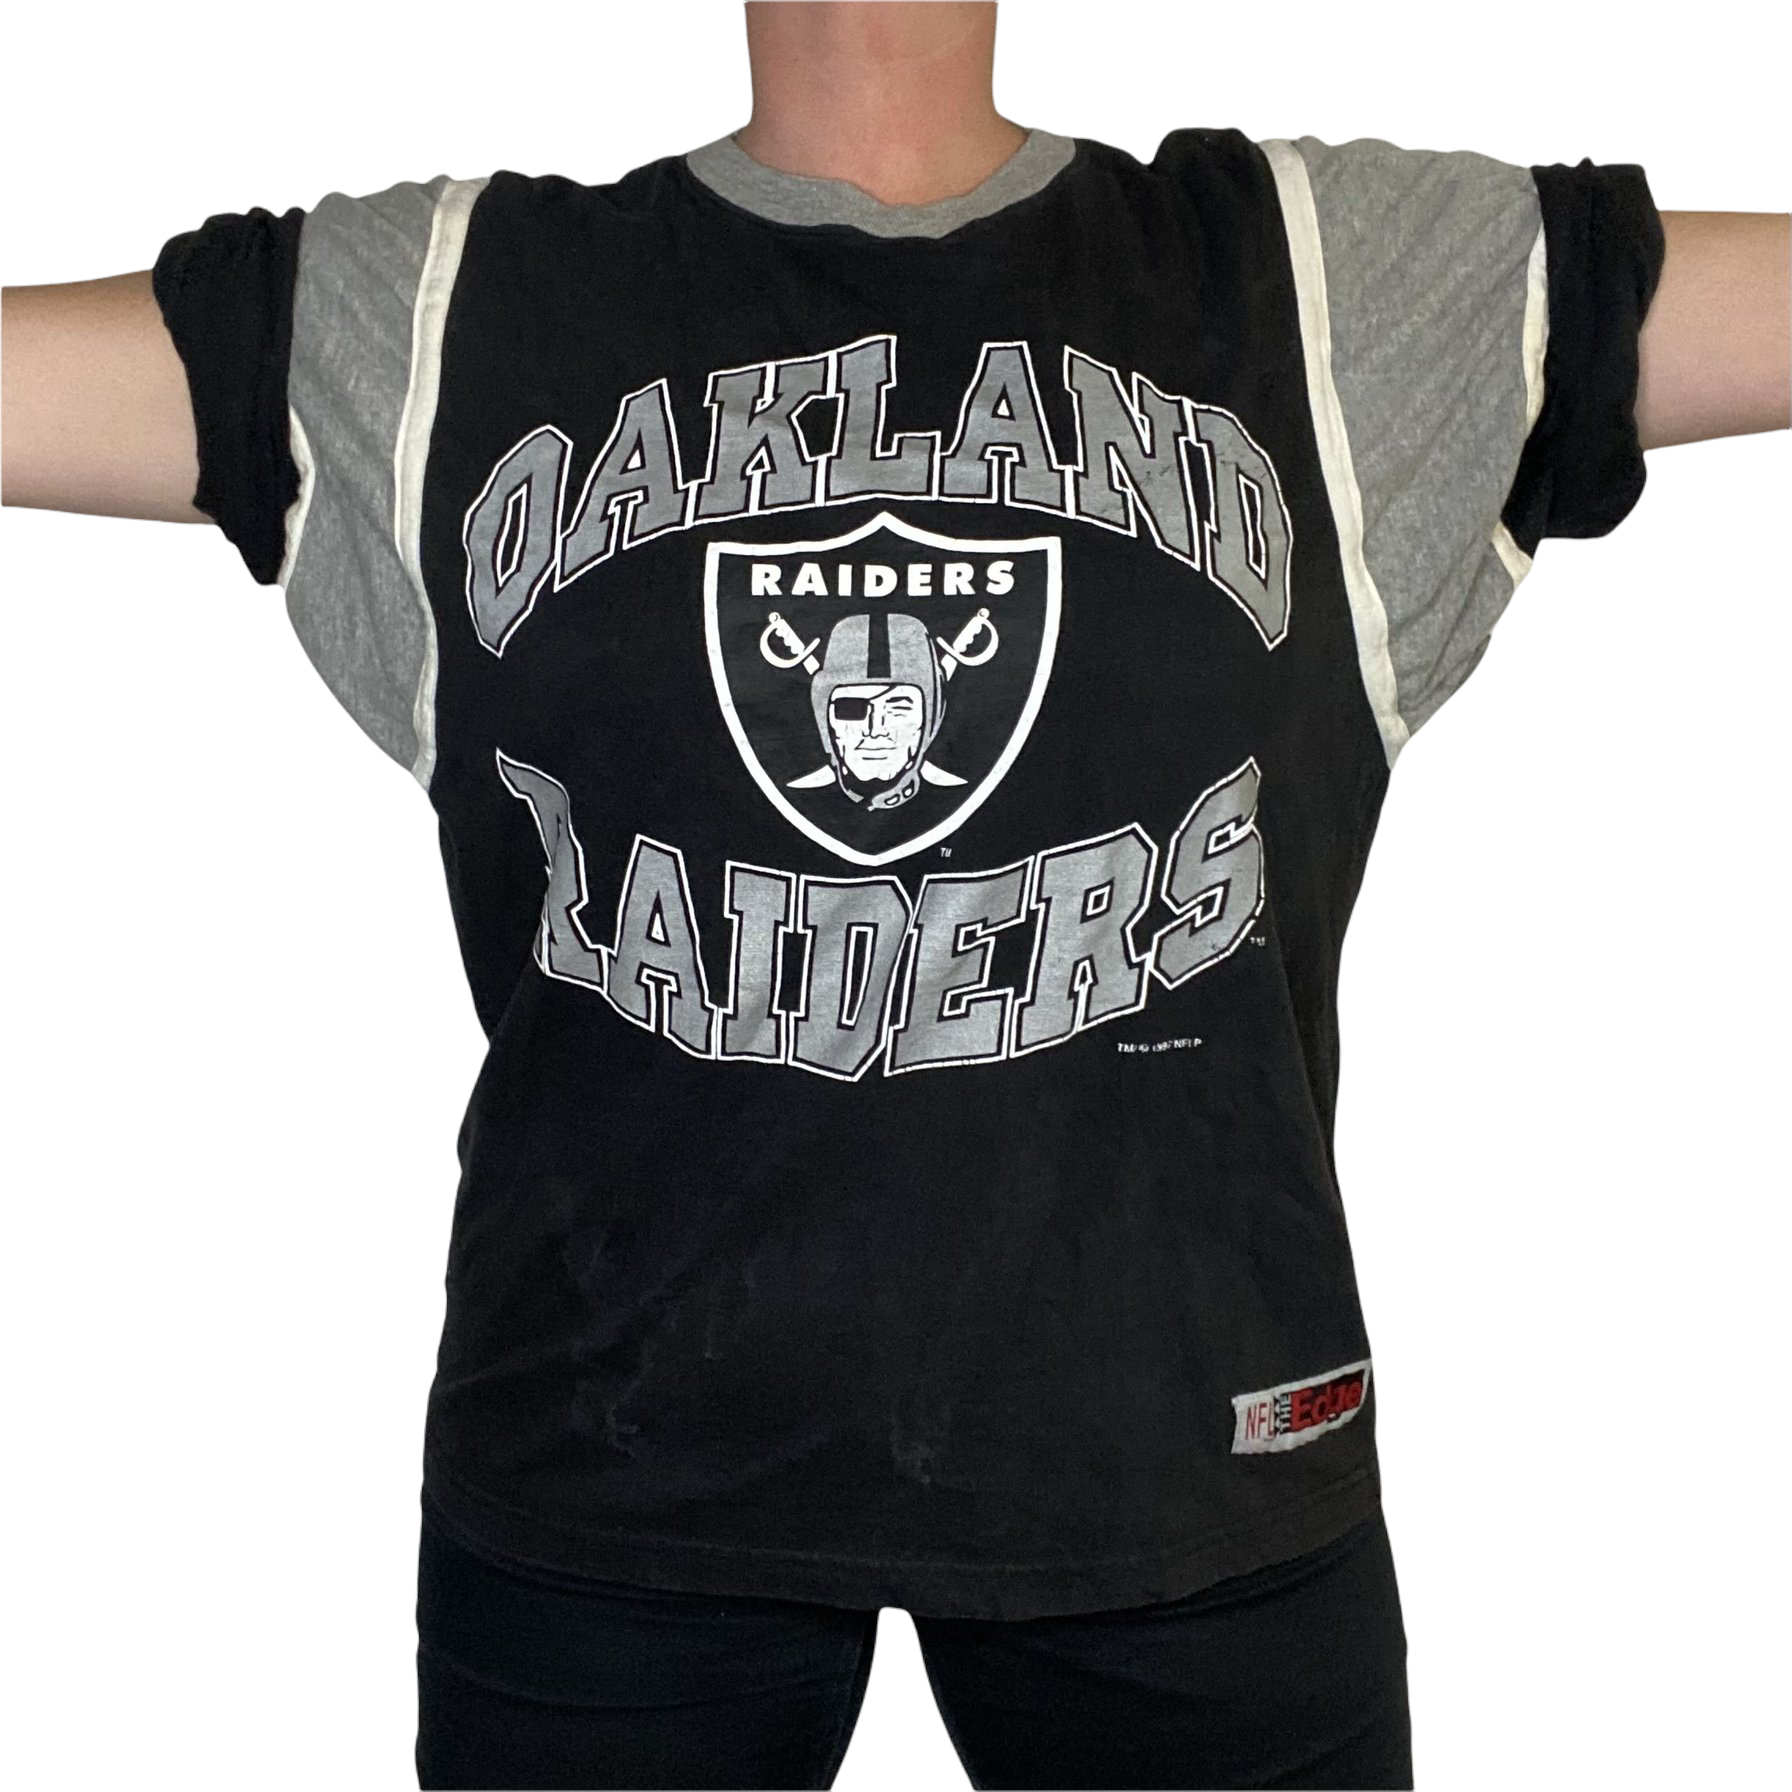 Vintage 1997 Oakland Raiders Oversized Tshirt from The Edge - M